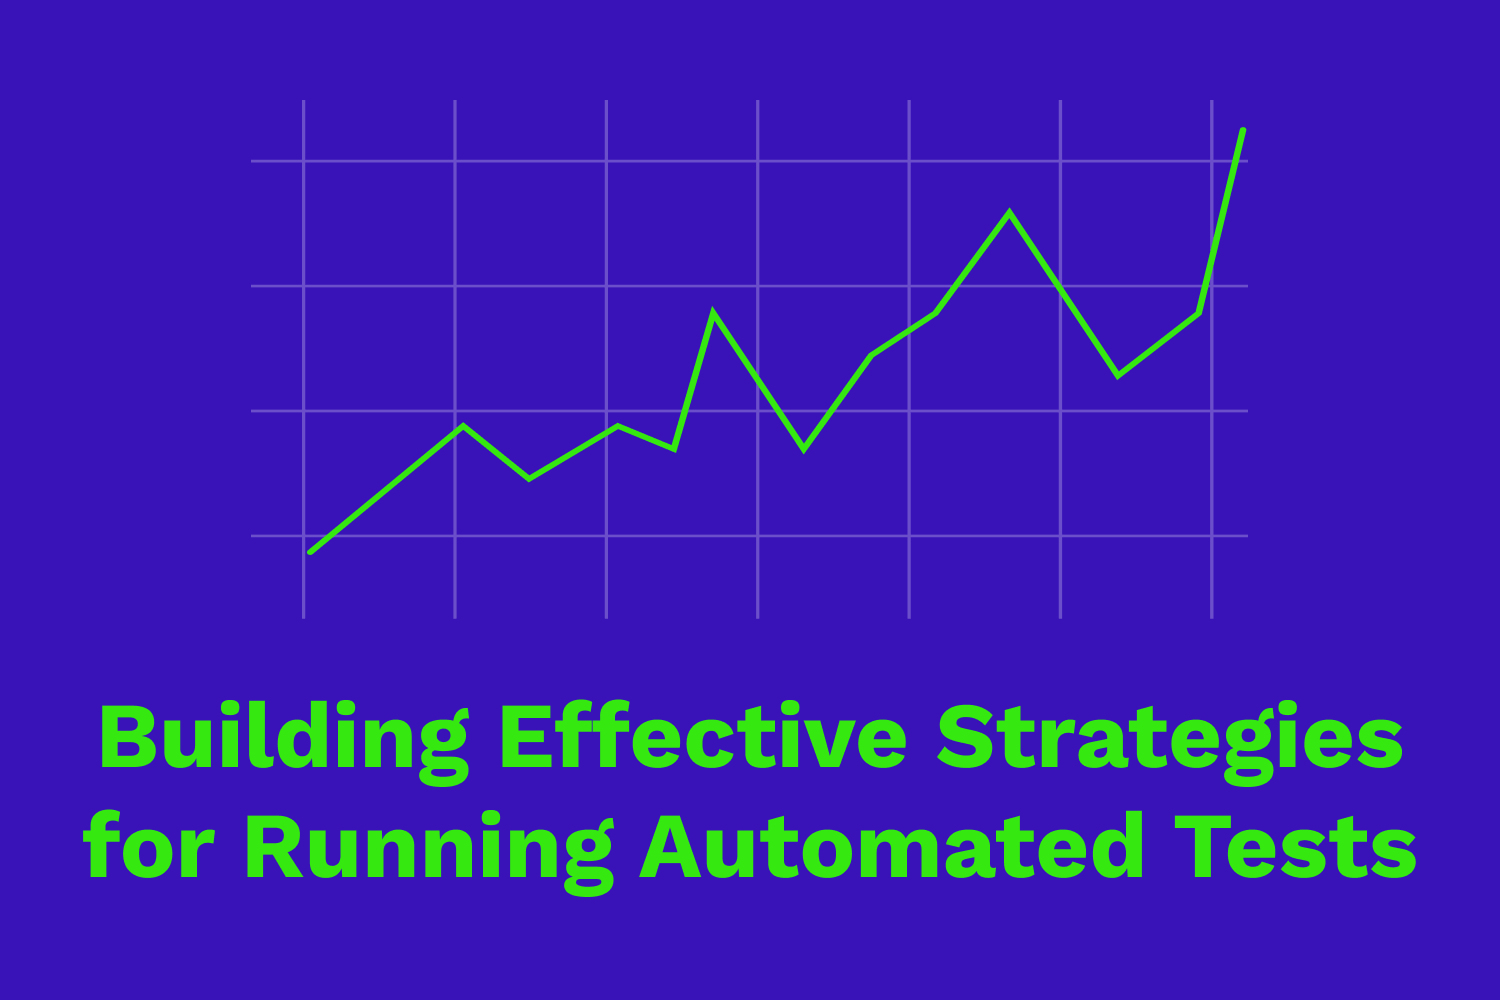 Building Effective Strategies for Running Automated Tests